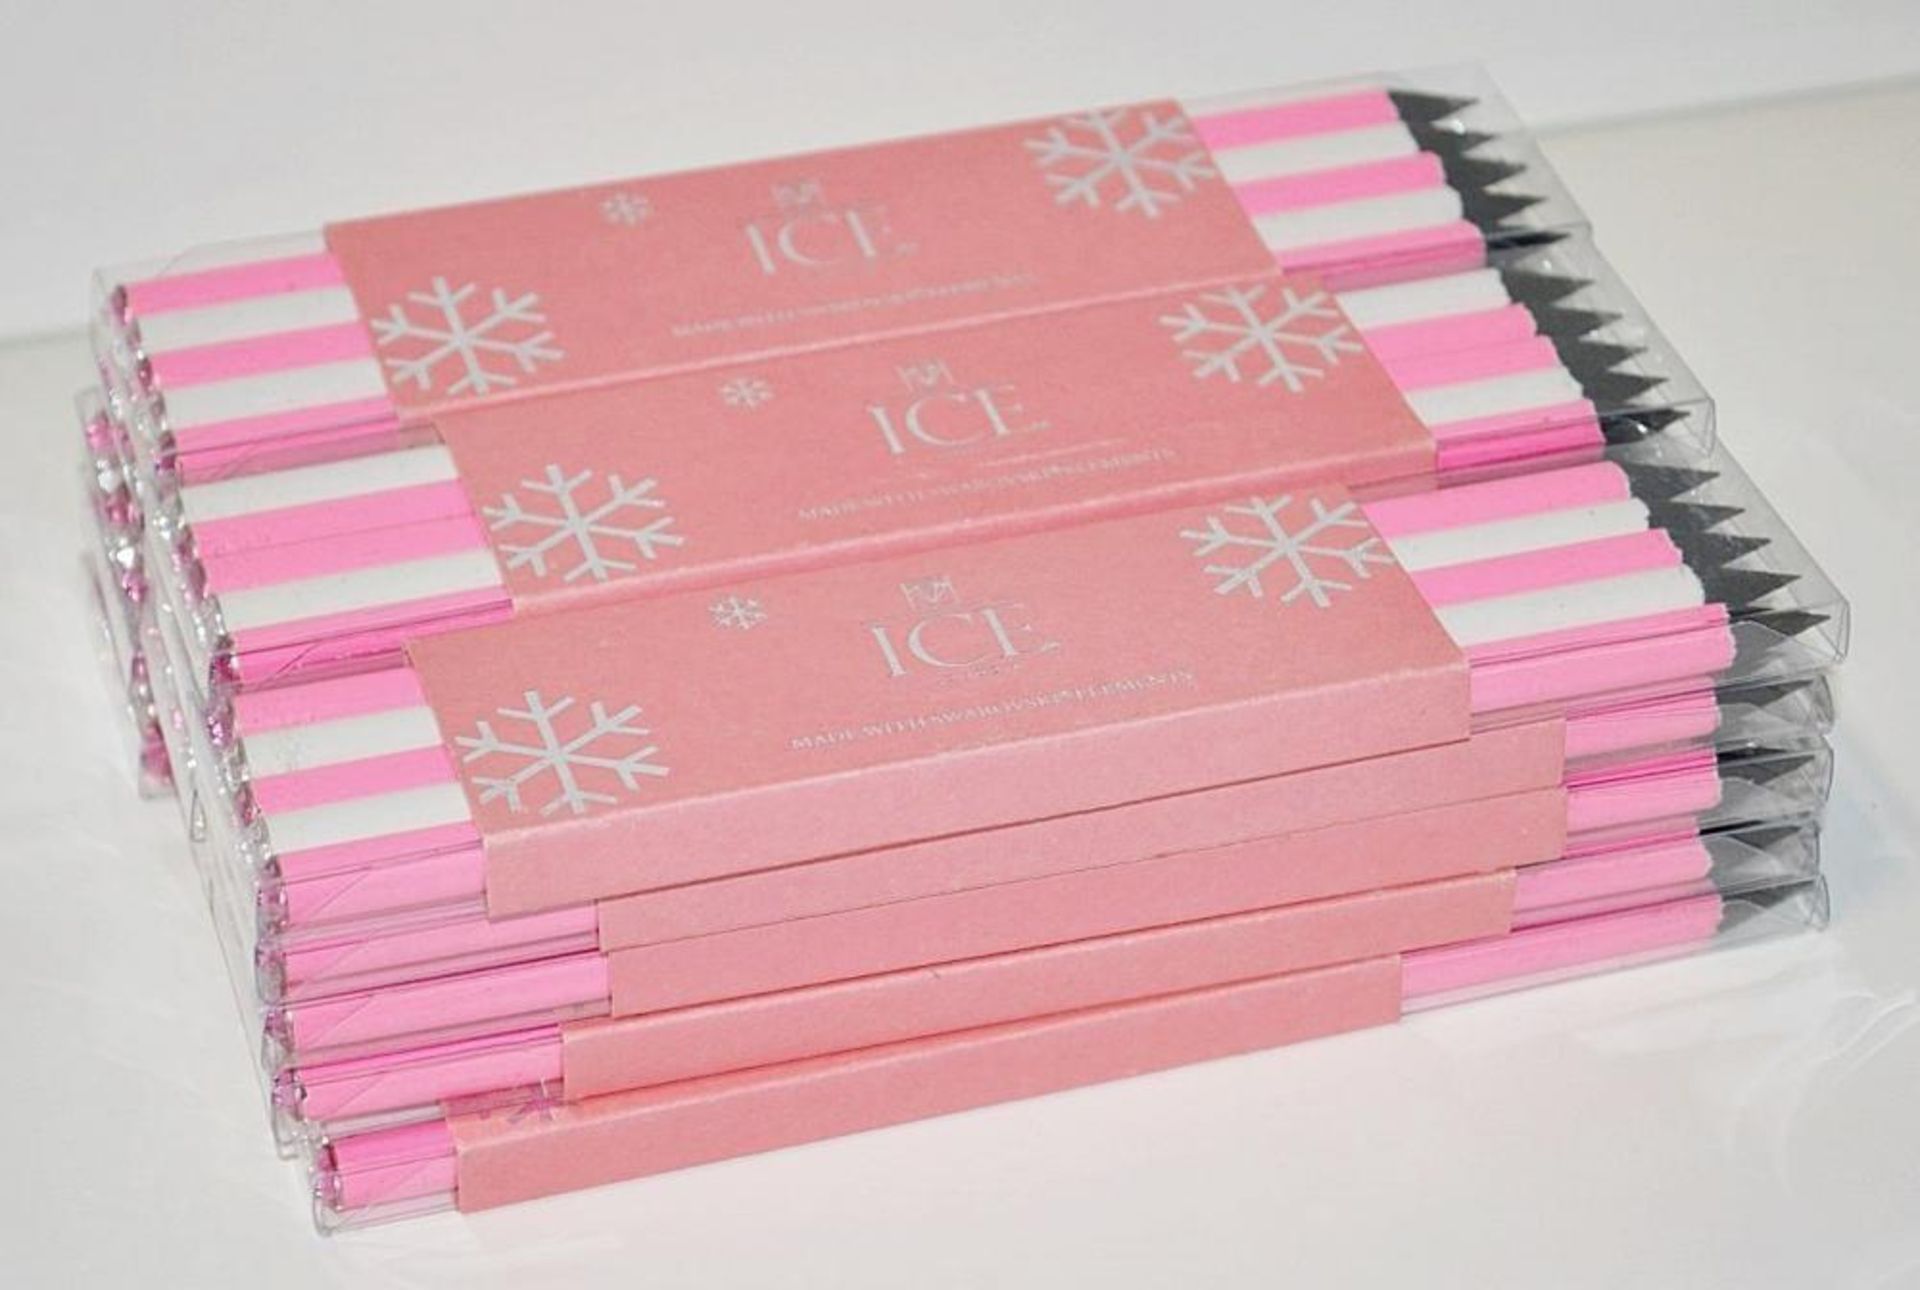 50 x ICE London Christmas Pencil Sets - Colour: PINK - Made With SWAROVSKI® ELEMENTS - Each Set - Image 3 of 4